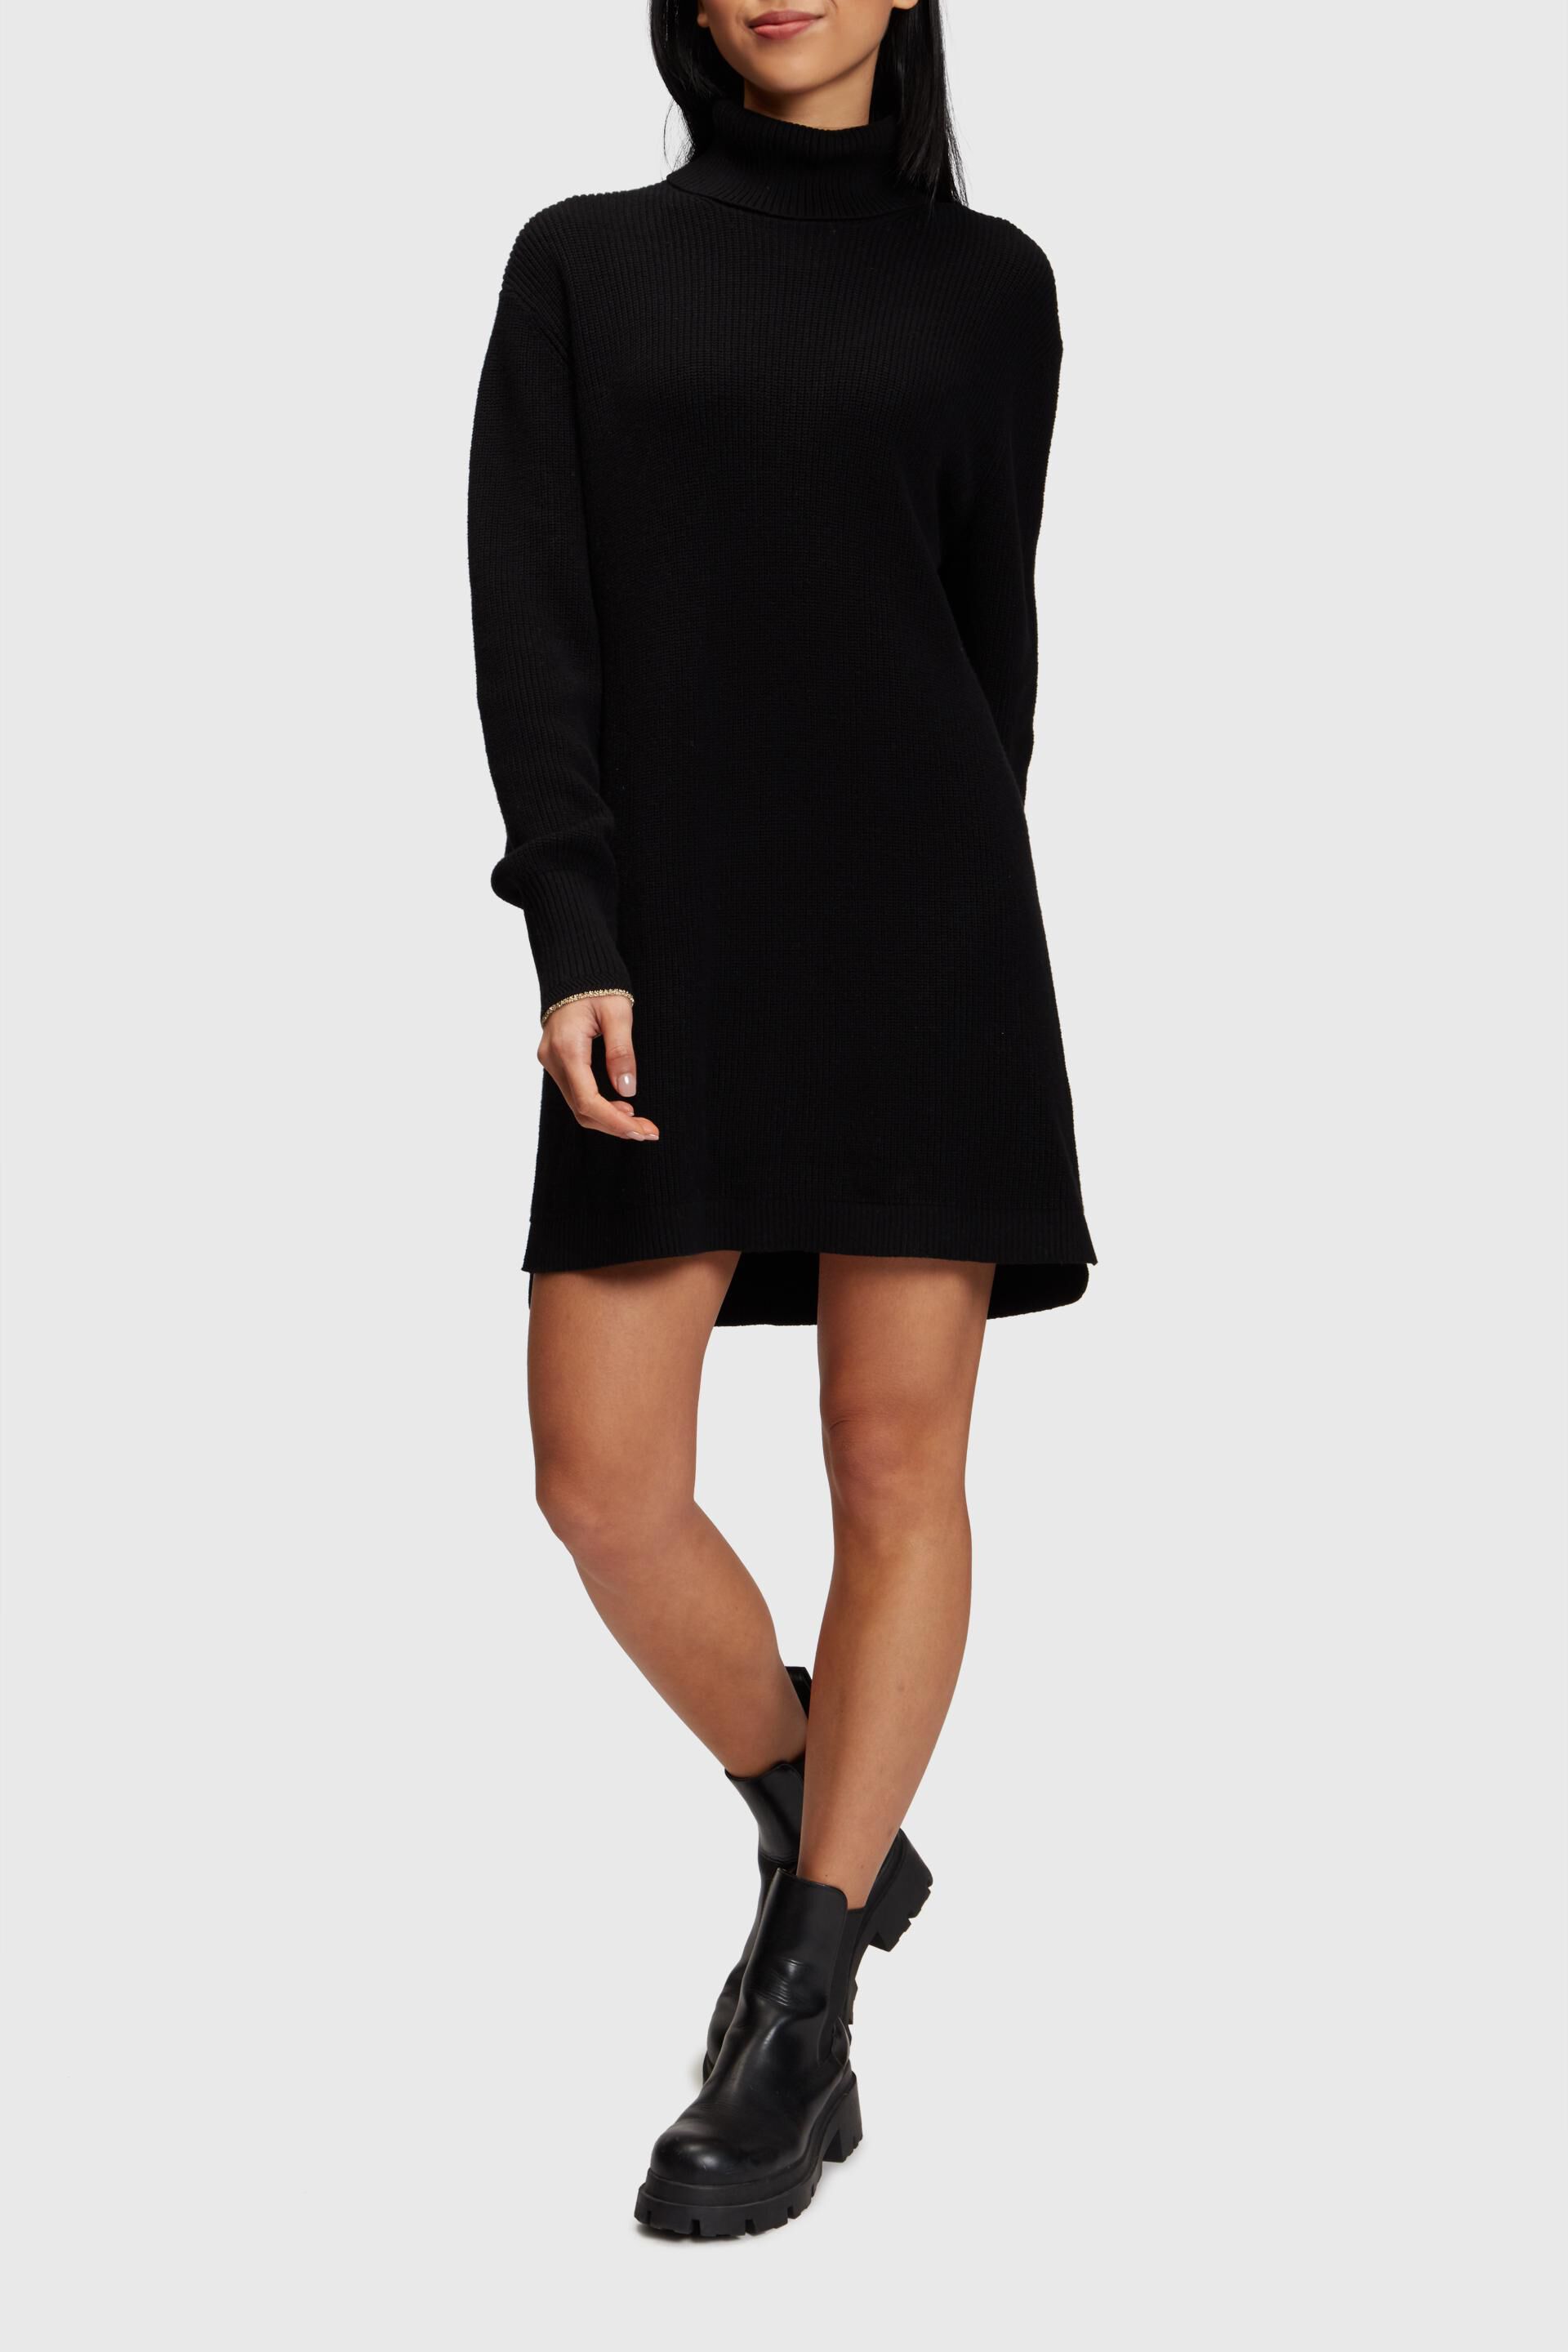 Esprit cashmere Knitted dress turtleneck with